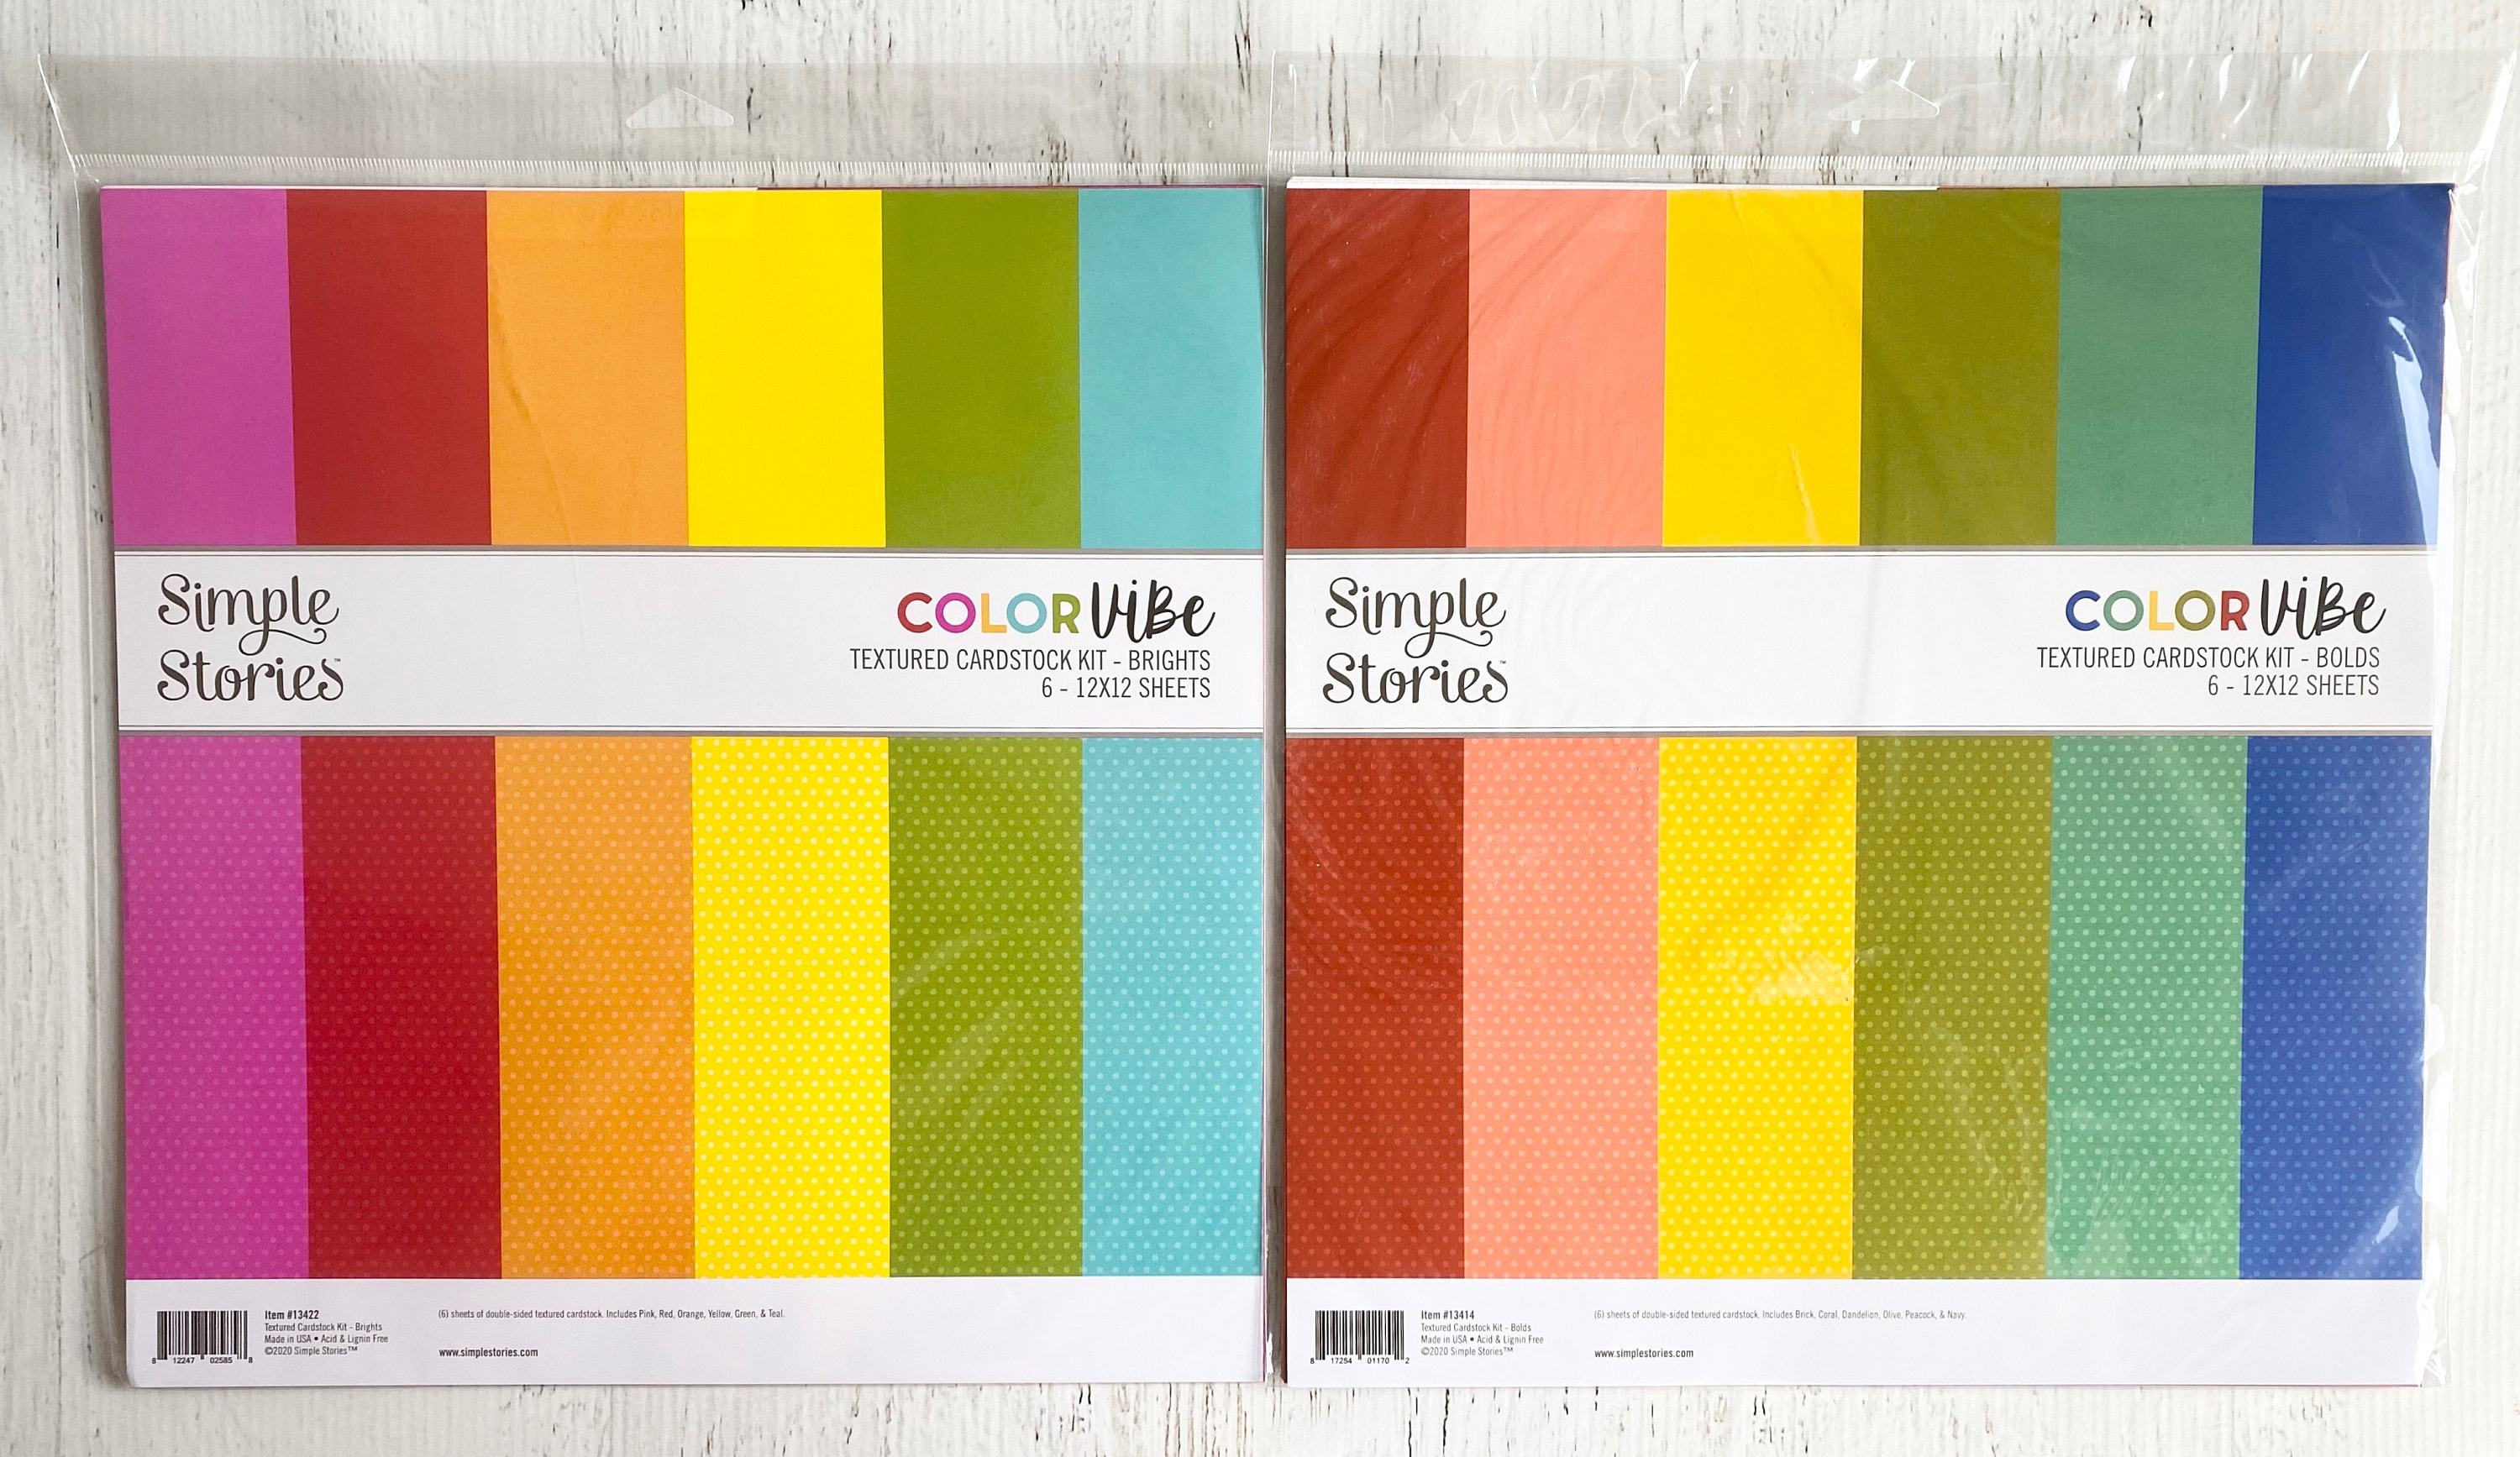 Simple Stories Color Vibe Textured Cardstock Kit - Boho